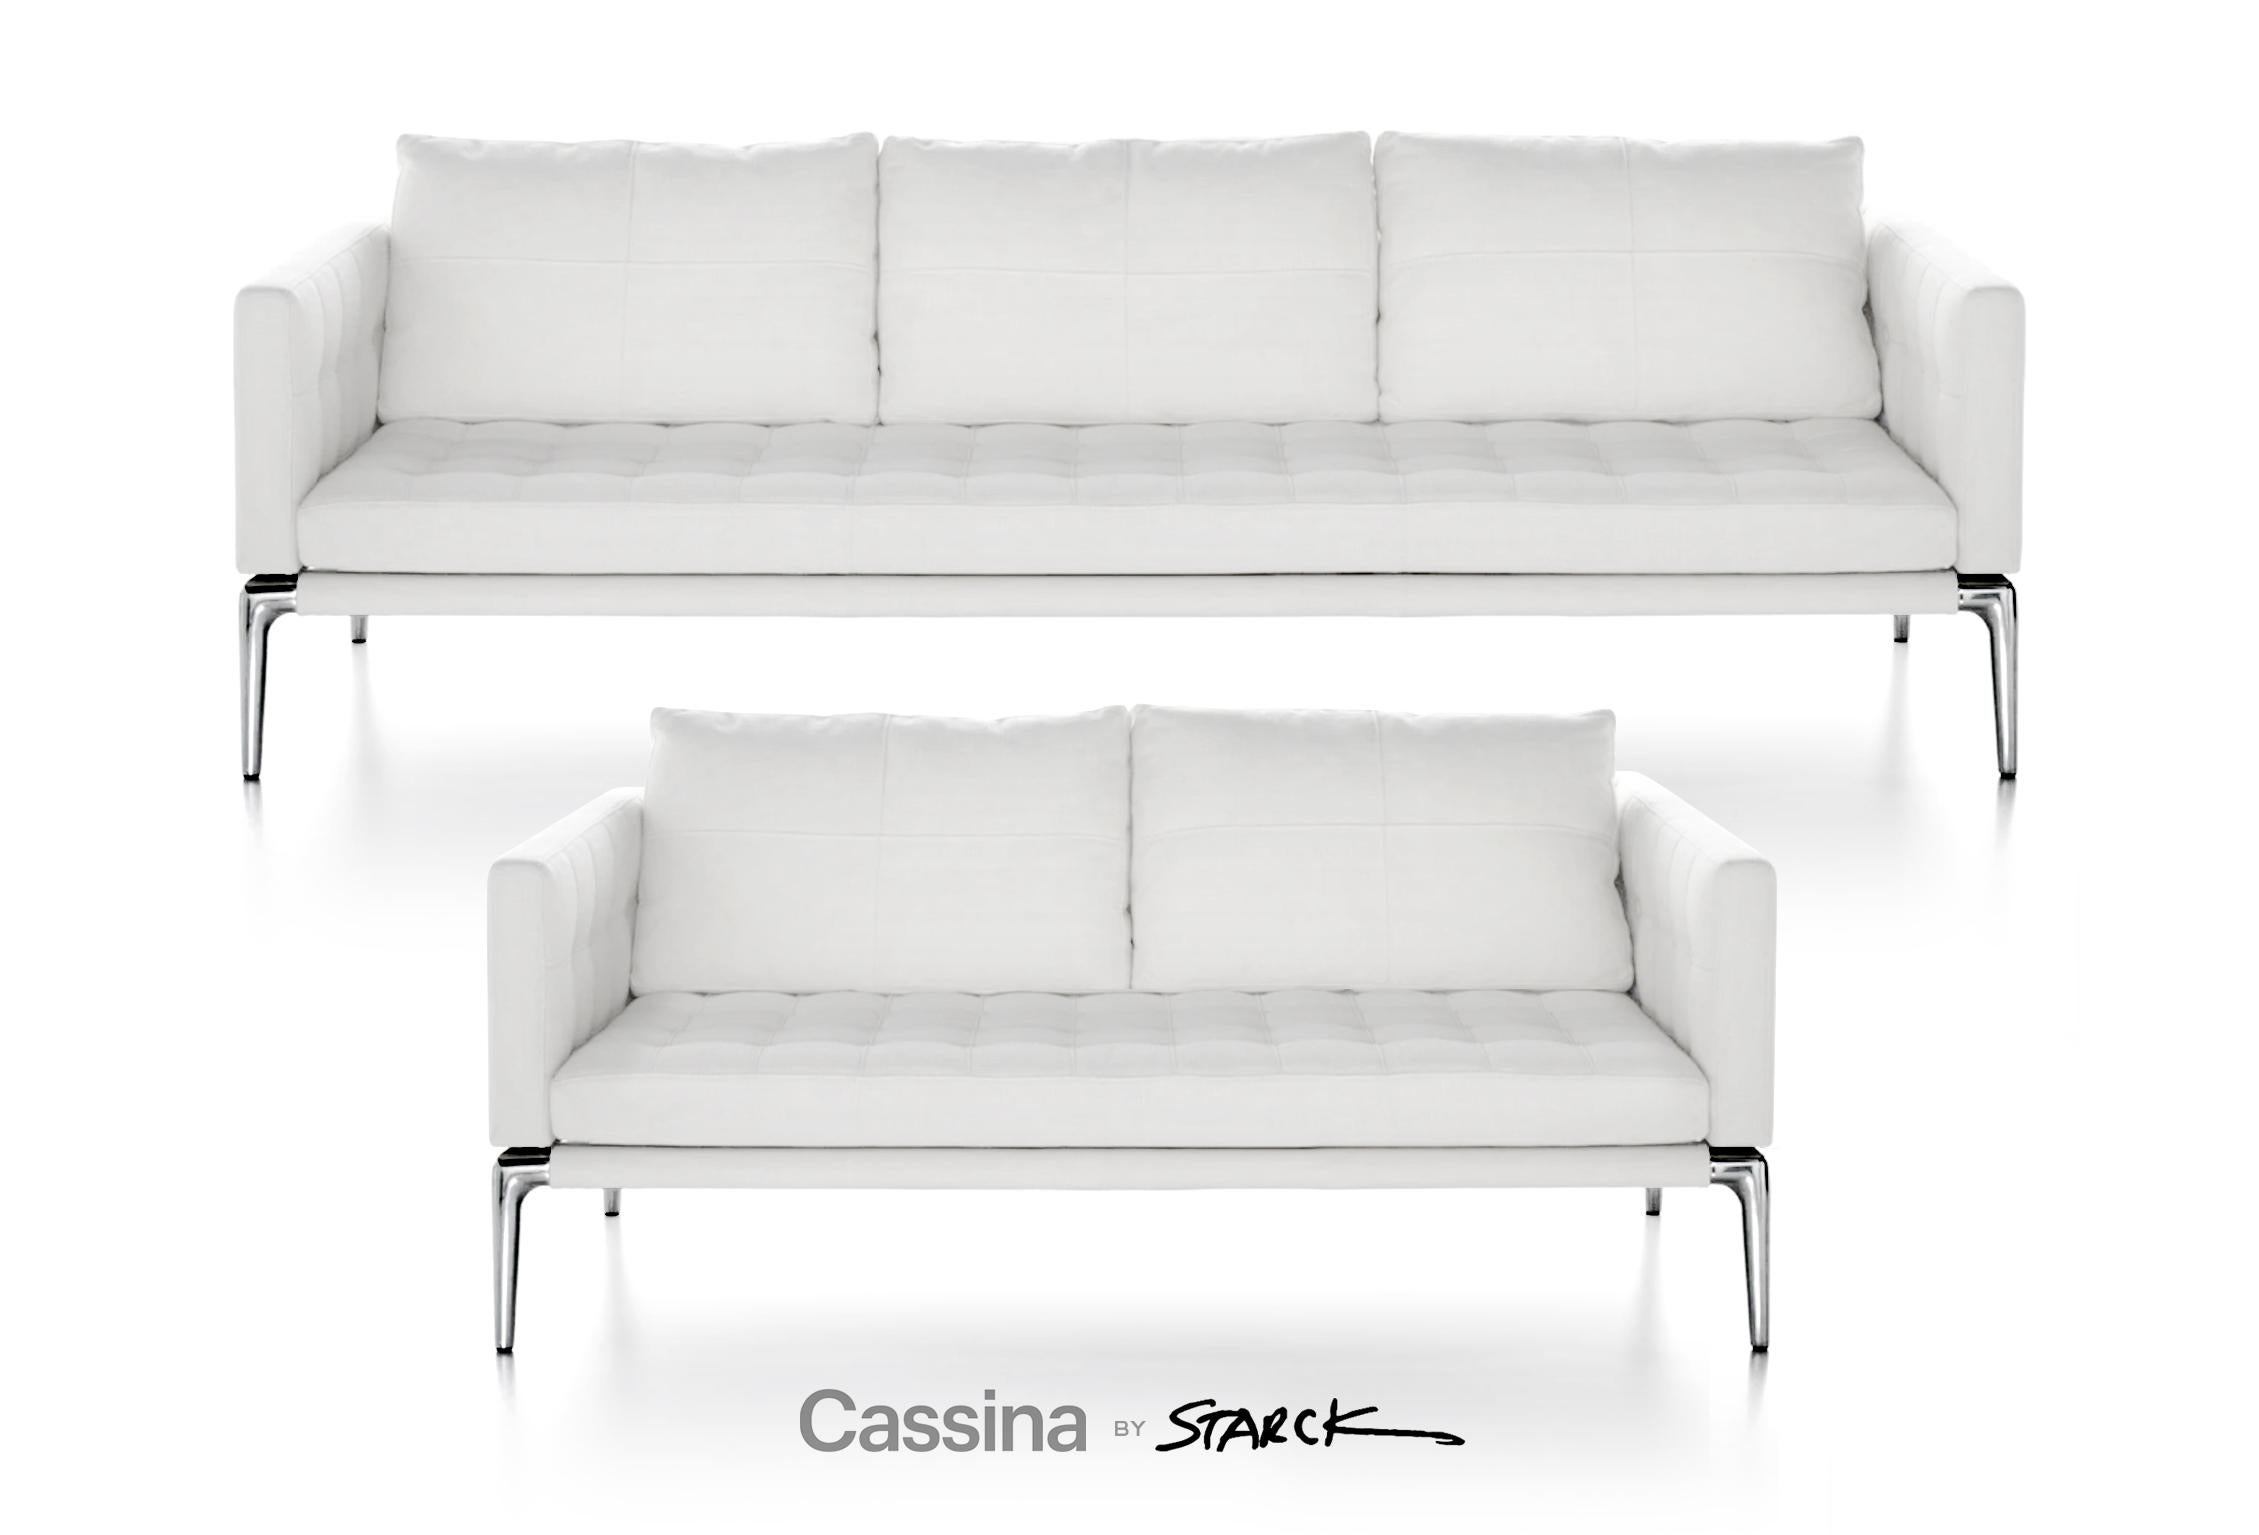 Pair of sofas designed by Philippe Starck.
Models ''Volage 243'' and ''Volage 167''.
White padded leather, feather cushions.

Recent Cassina edition, signed, very high quality.

Excellent condition.

New price of the set: 20000e (3 places: